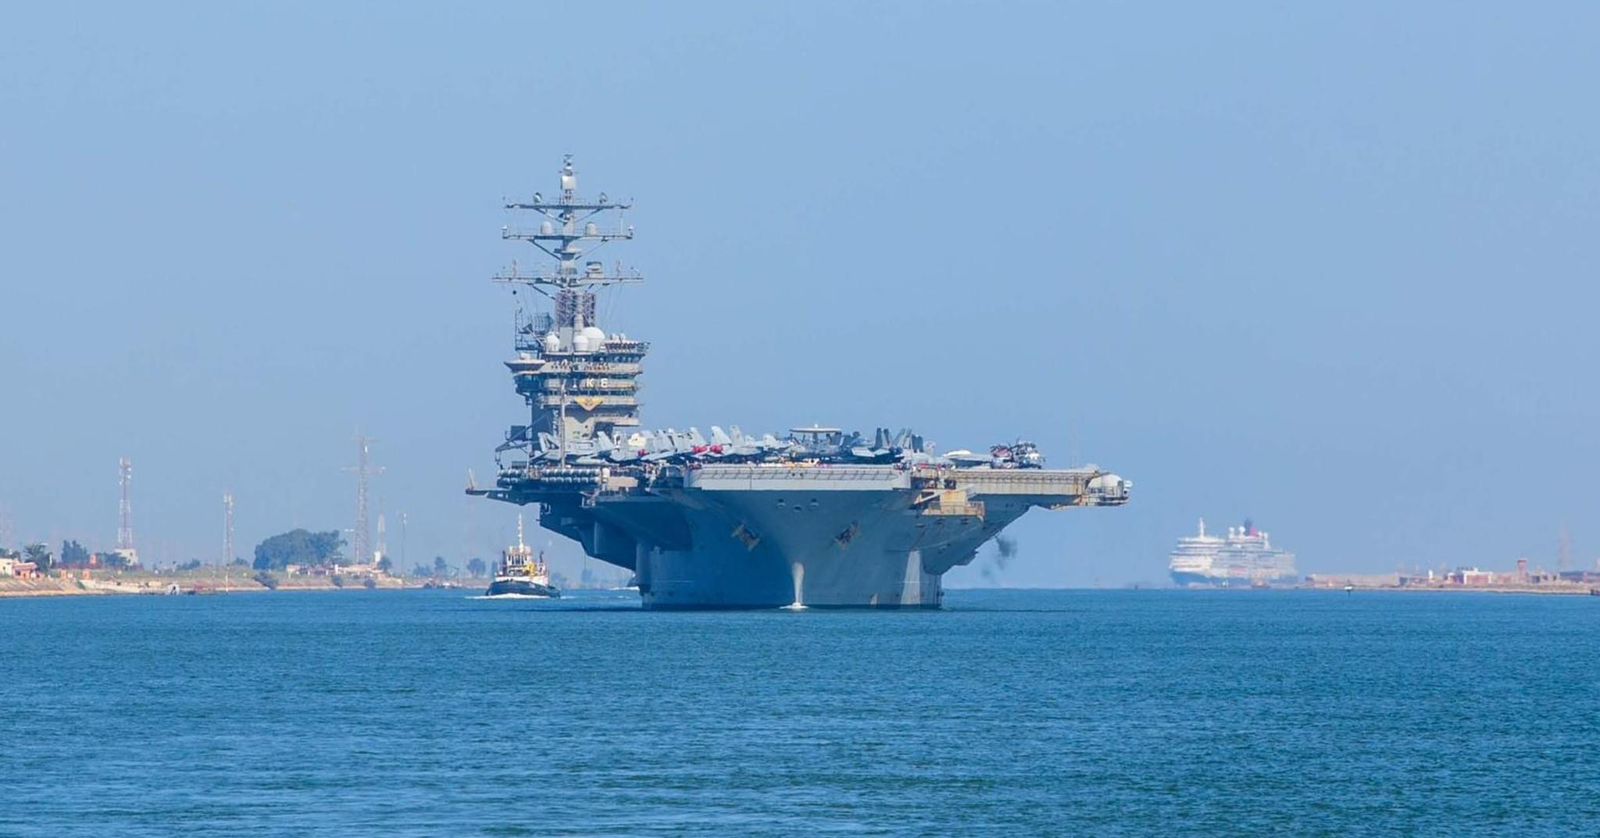 USS Dwight D. Eisenhower Carrier strike group enhances maritime capability in the Middle East